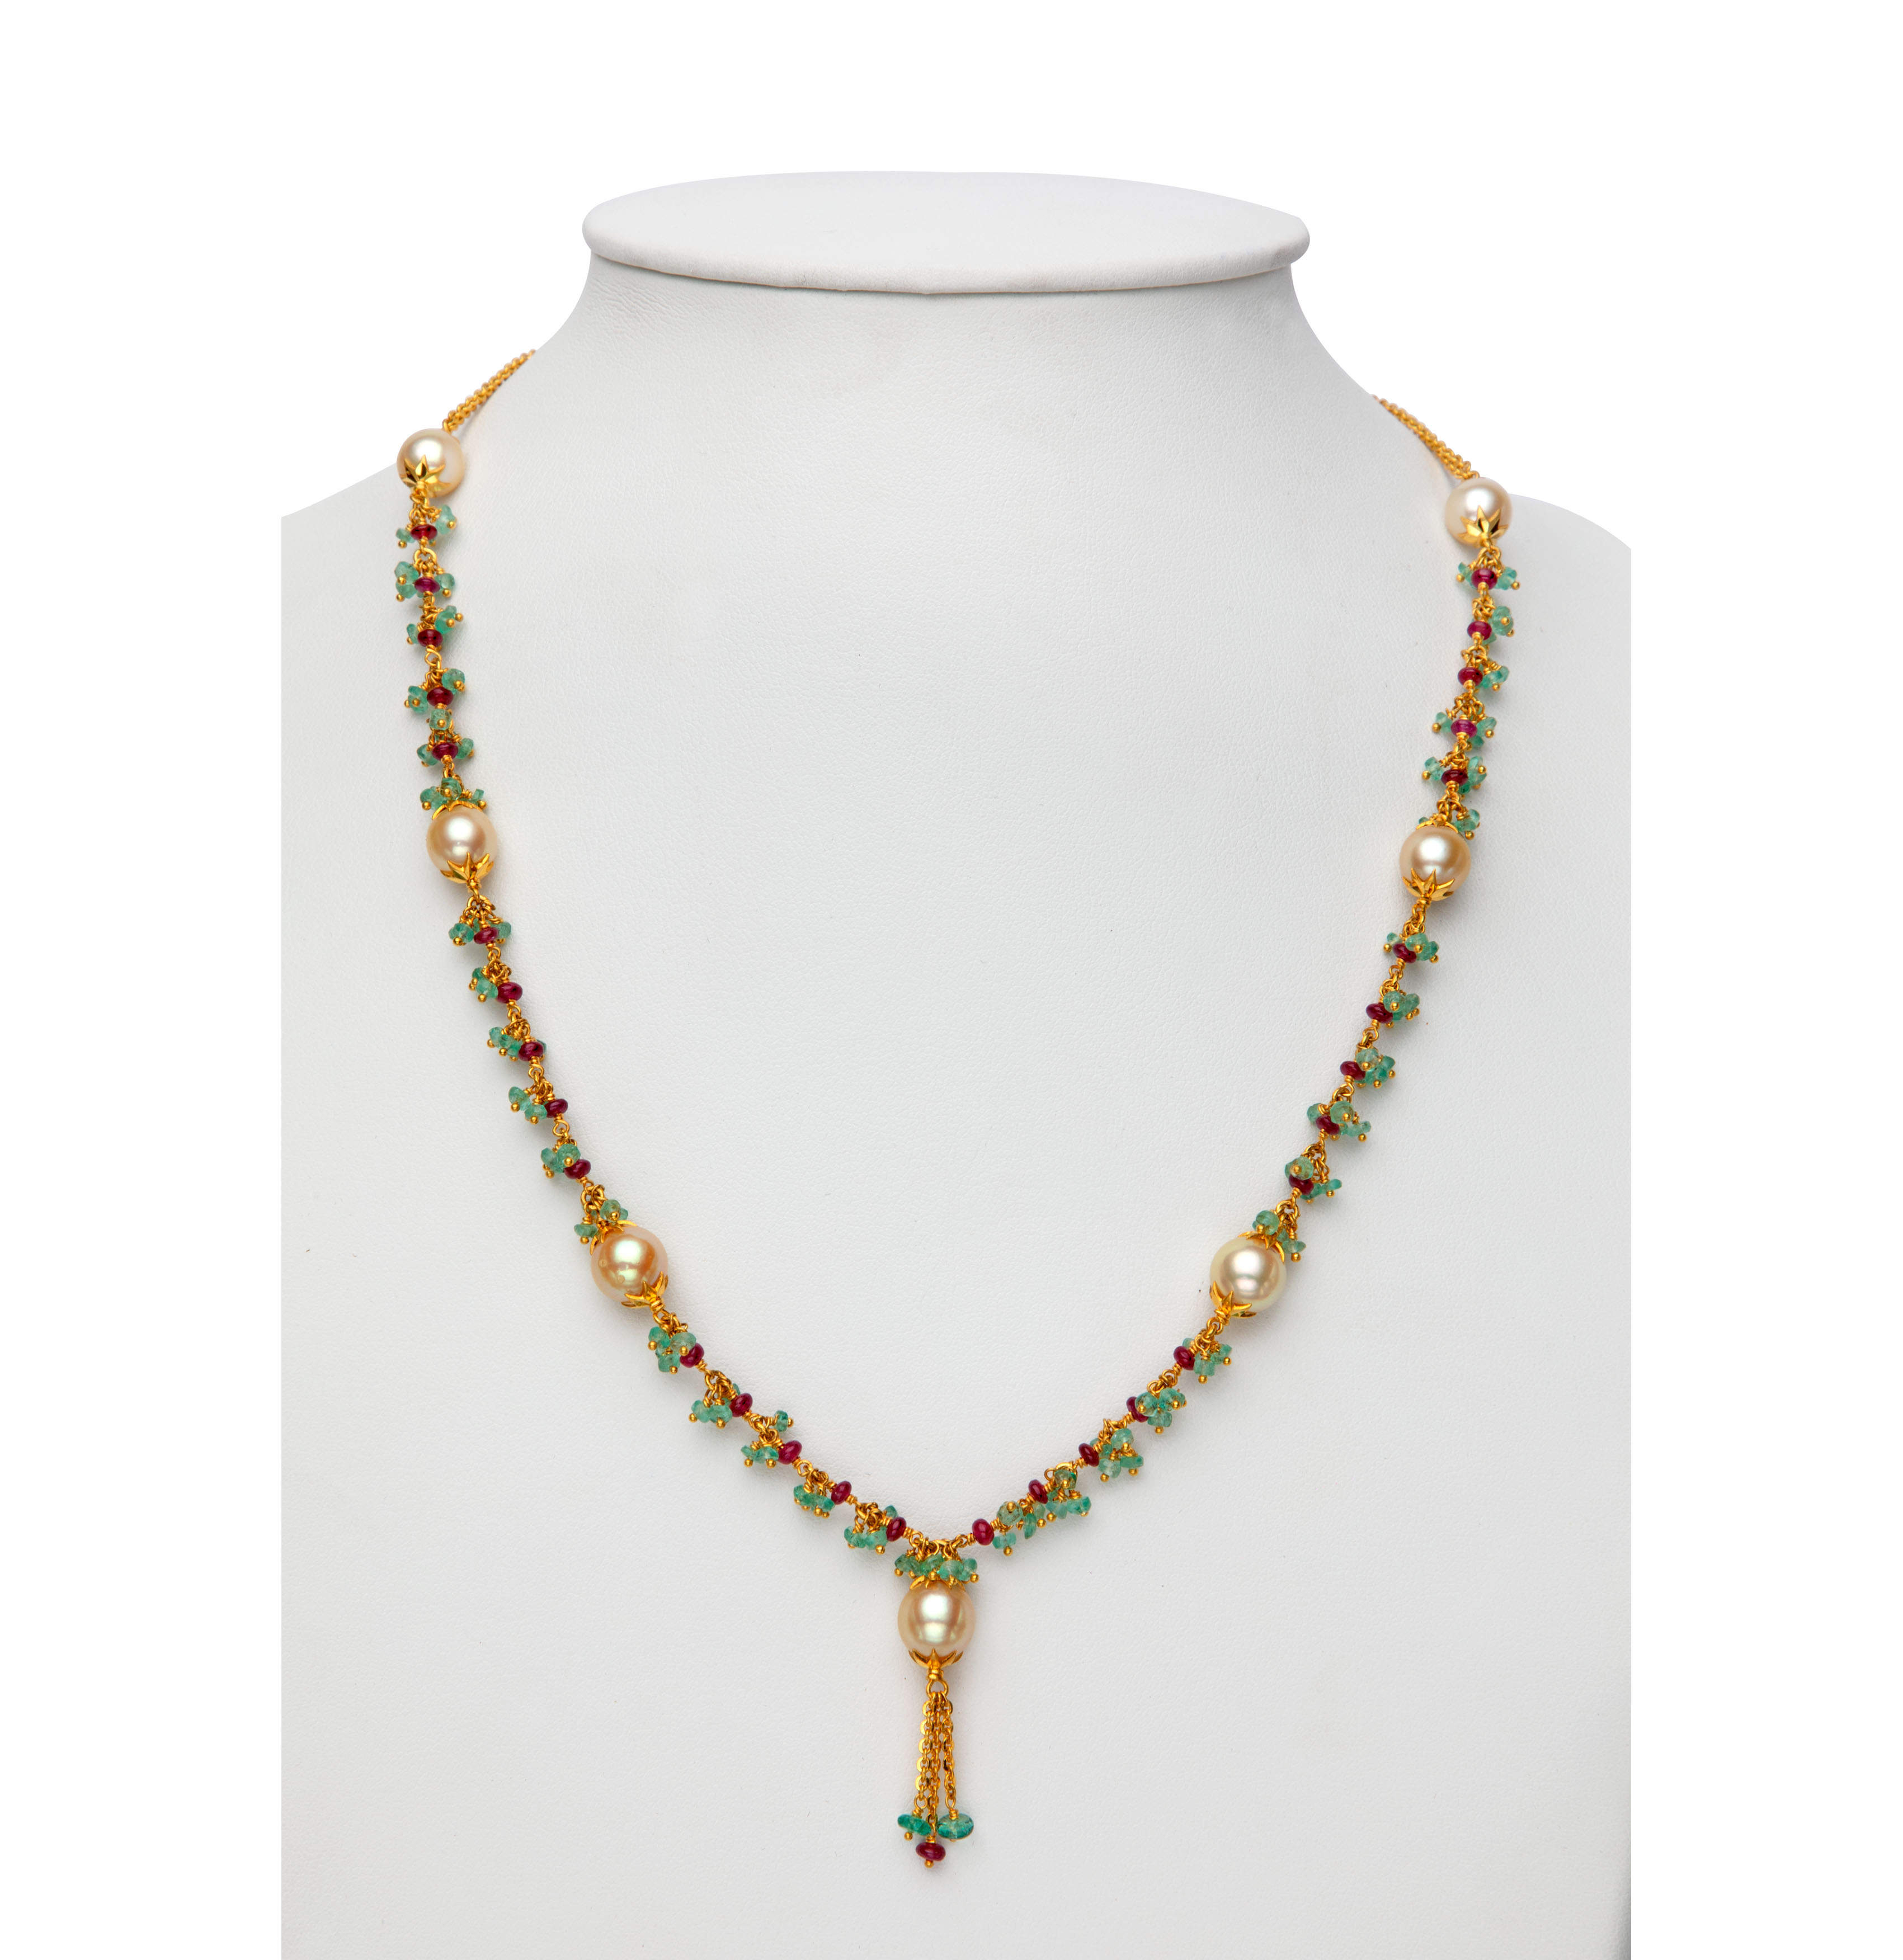 Designer Gold With Pearls And Real Ruby Emerald Necklace Mangatrai